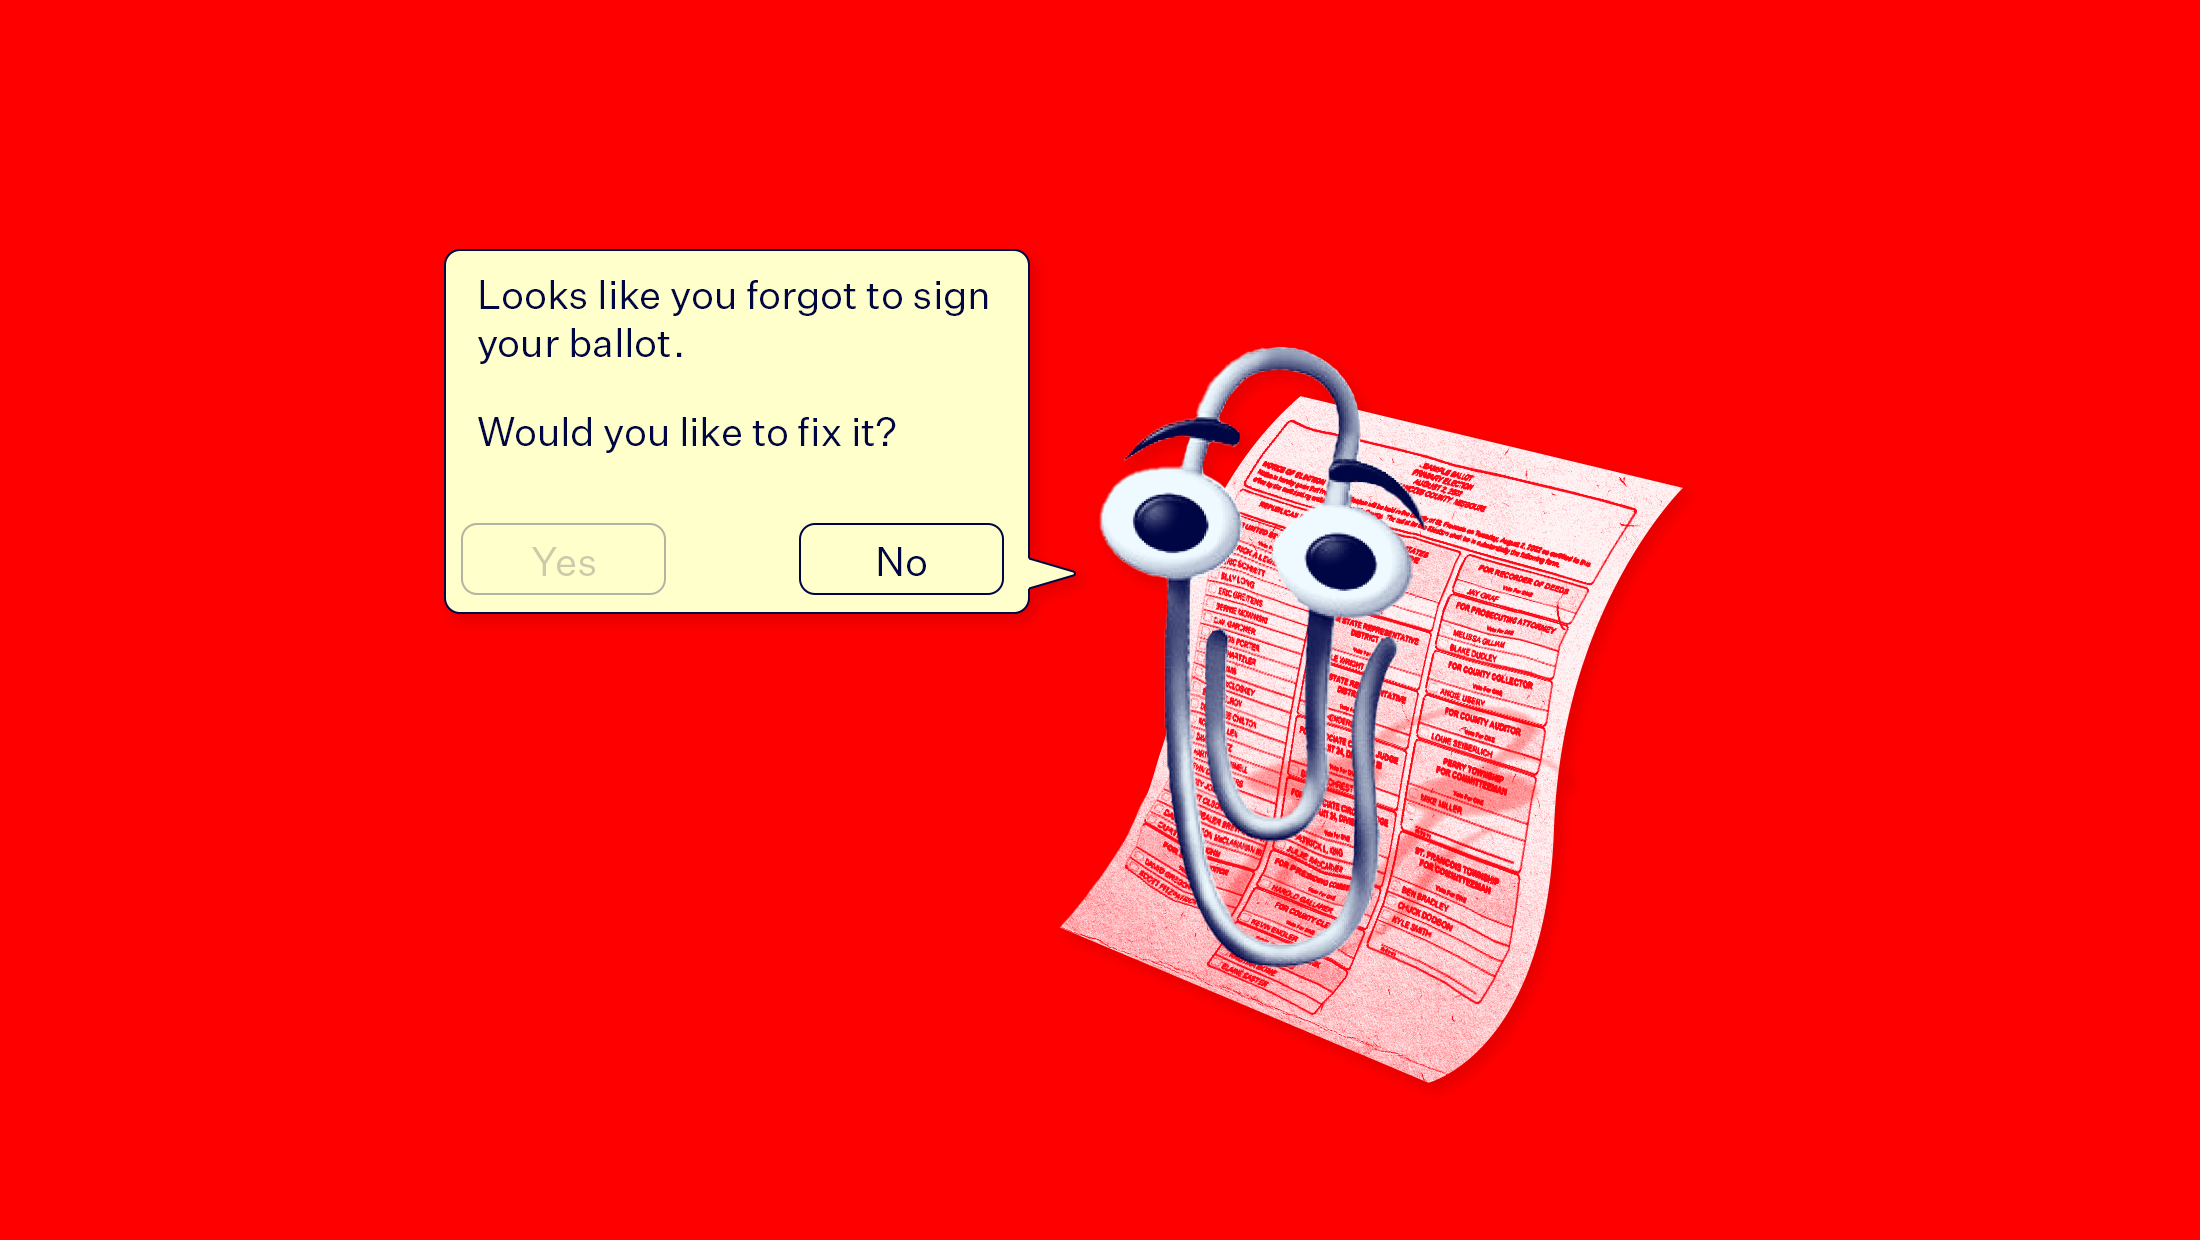 Cartoon paper clip with eyes on top of a ballot on a bright red background. The paper clip has a speech bubble that reads "Looks like you forgot to sign your ballot. Would you like to fix it?" with a yes and no option.